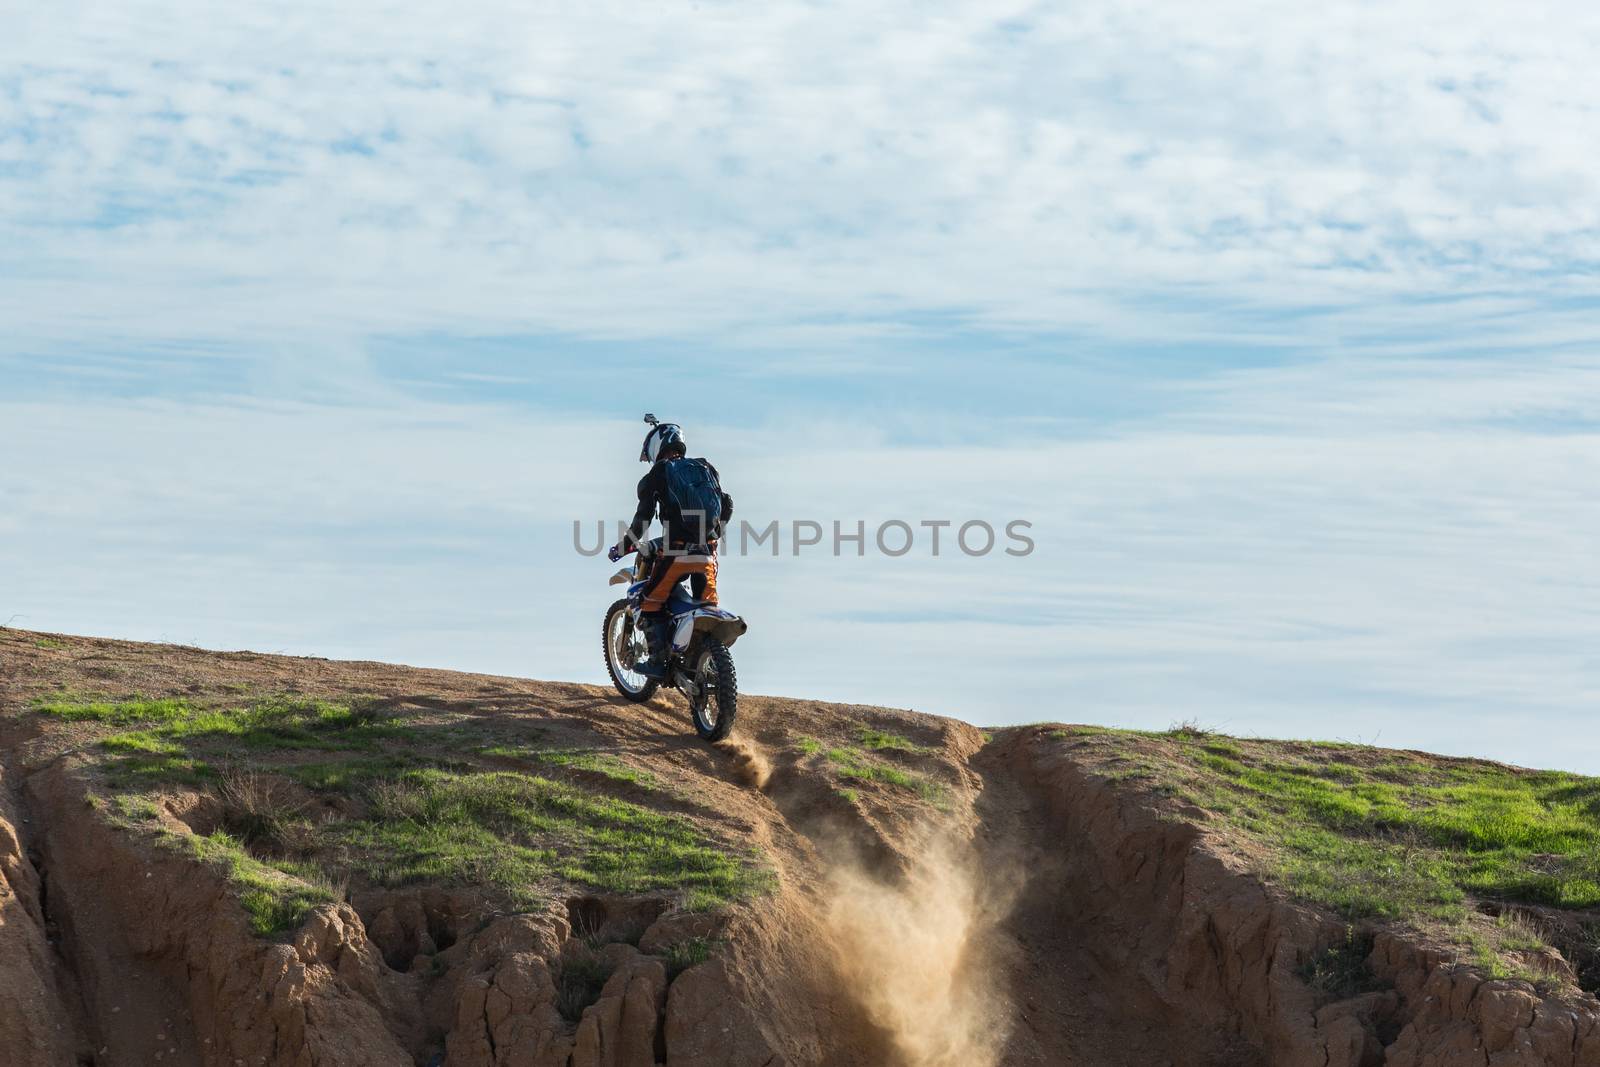 racer on a motorcycle in the desert summer day